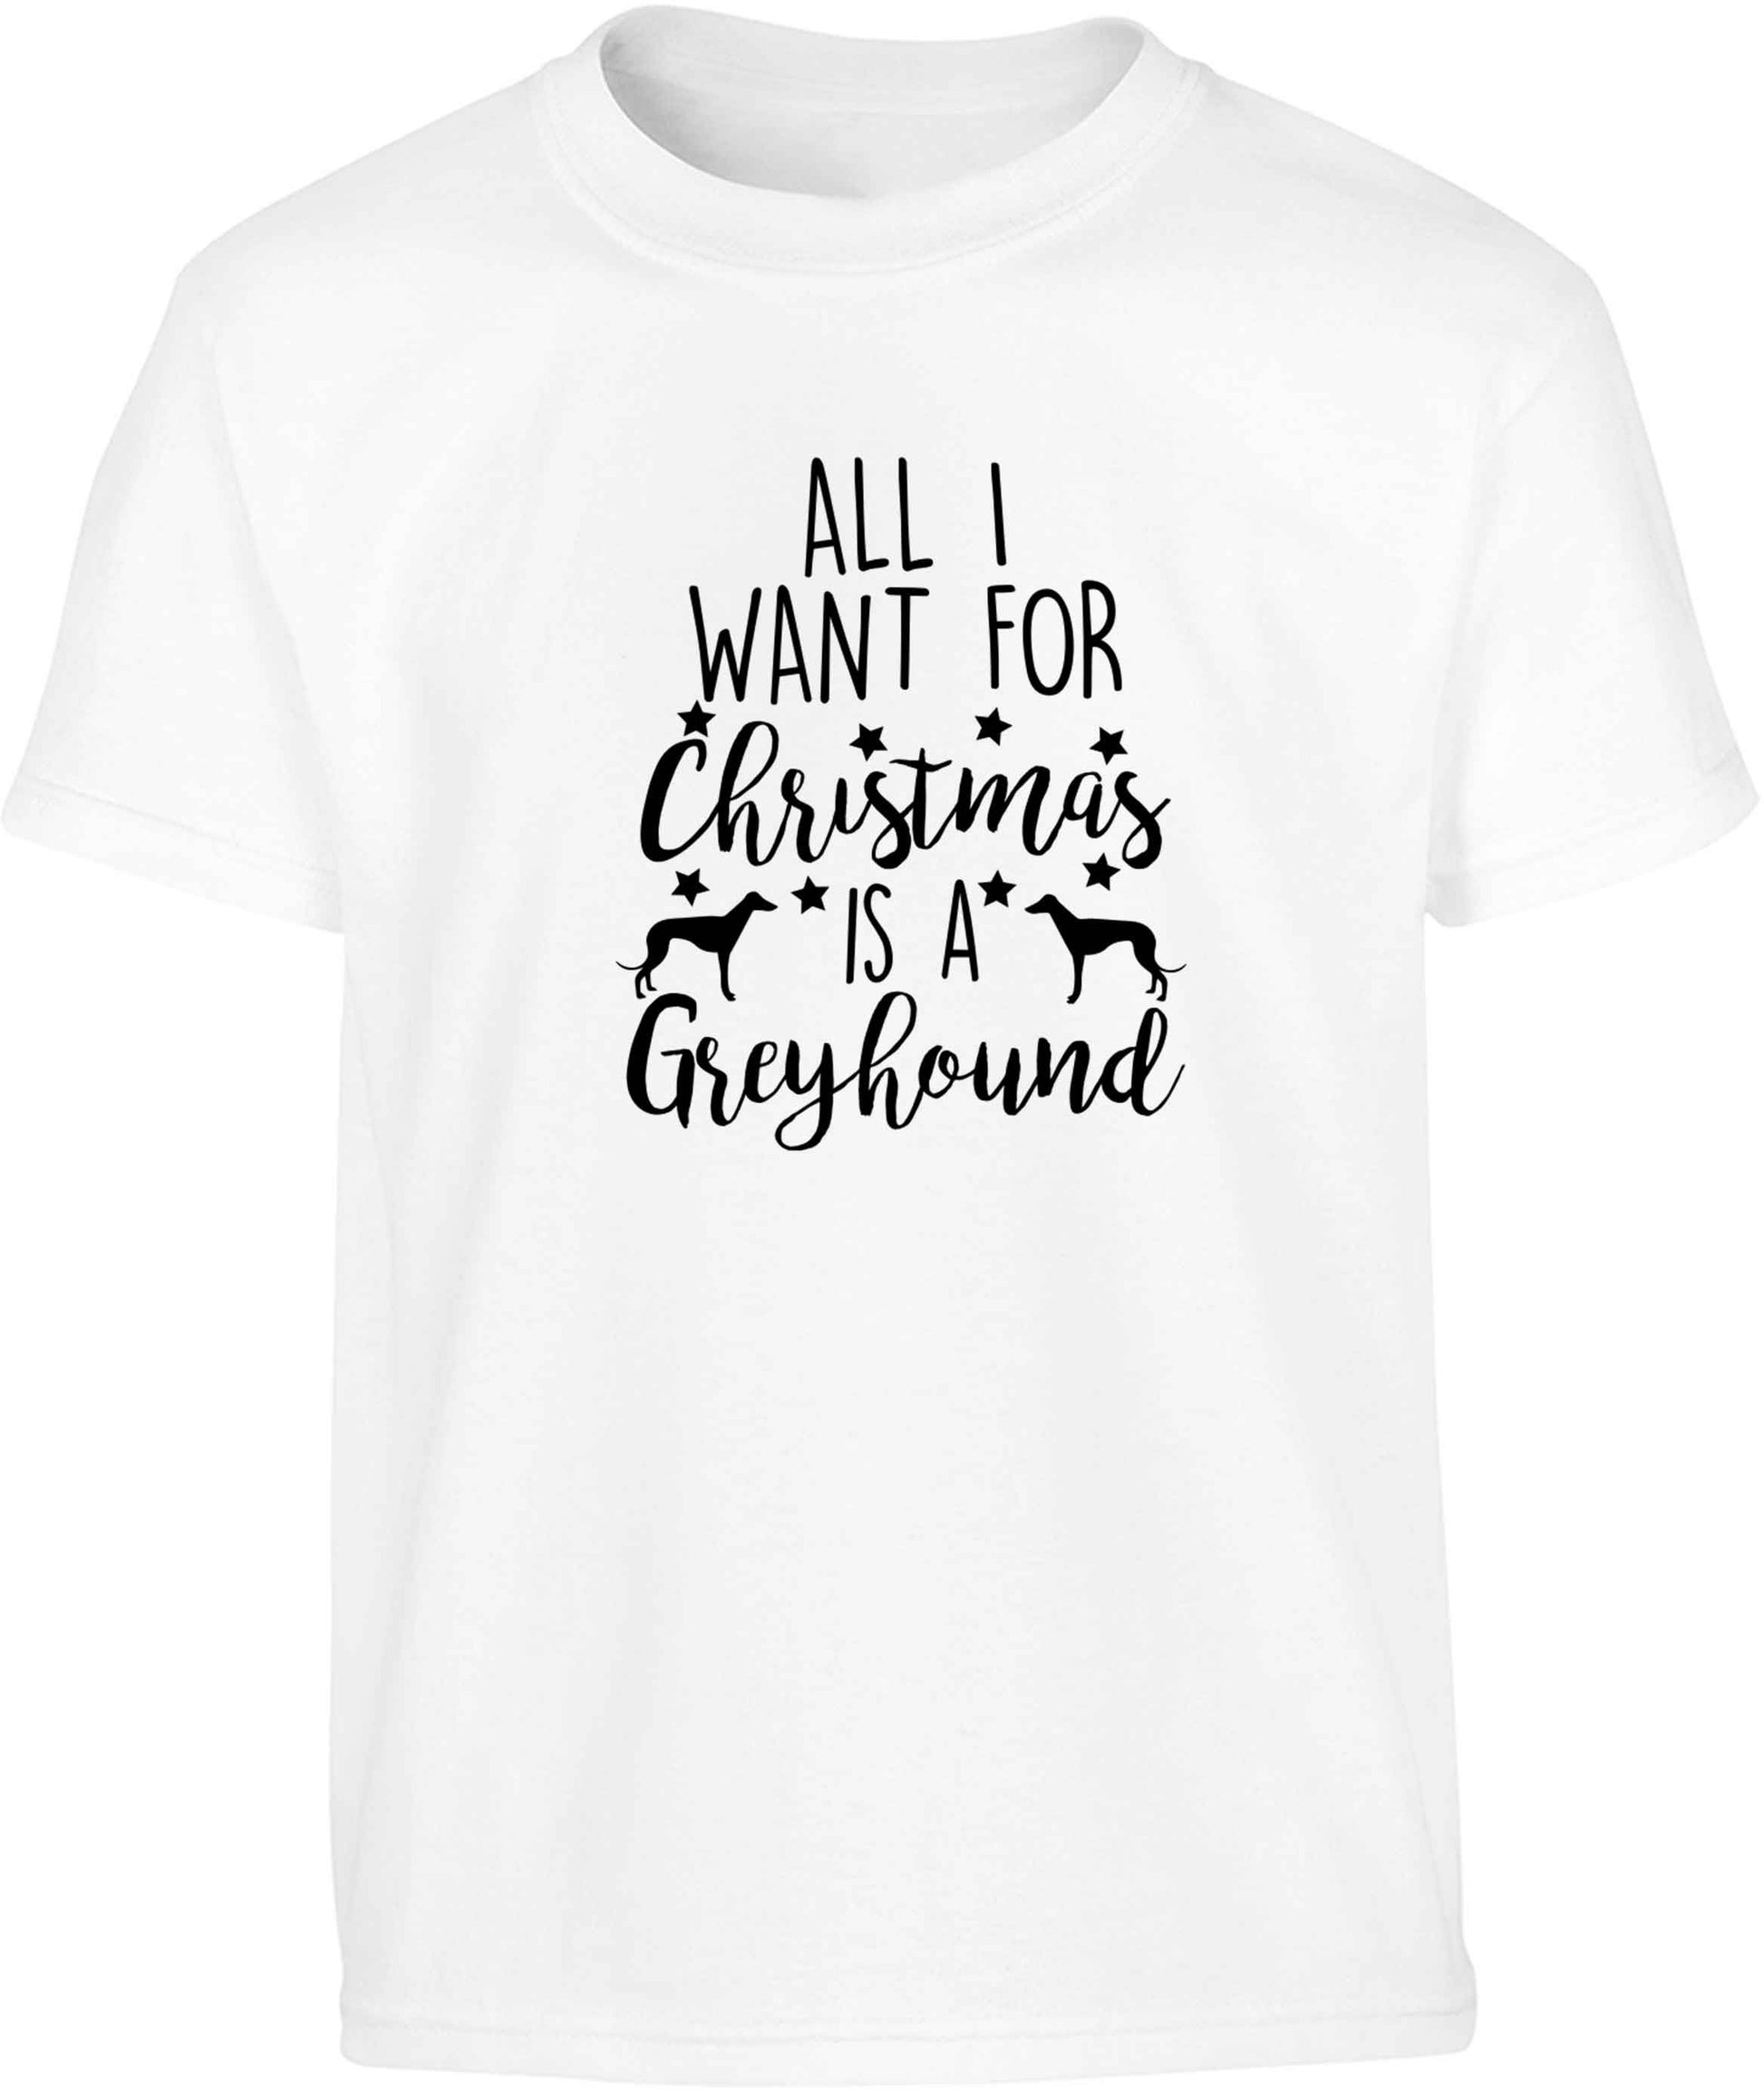 All I want for Christmas is a greyhound Children's white Tshirt 12-13 Years